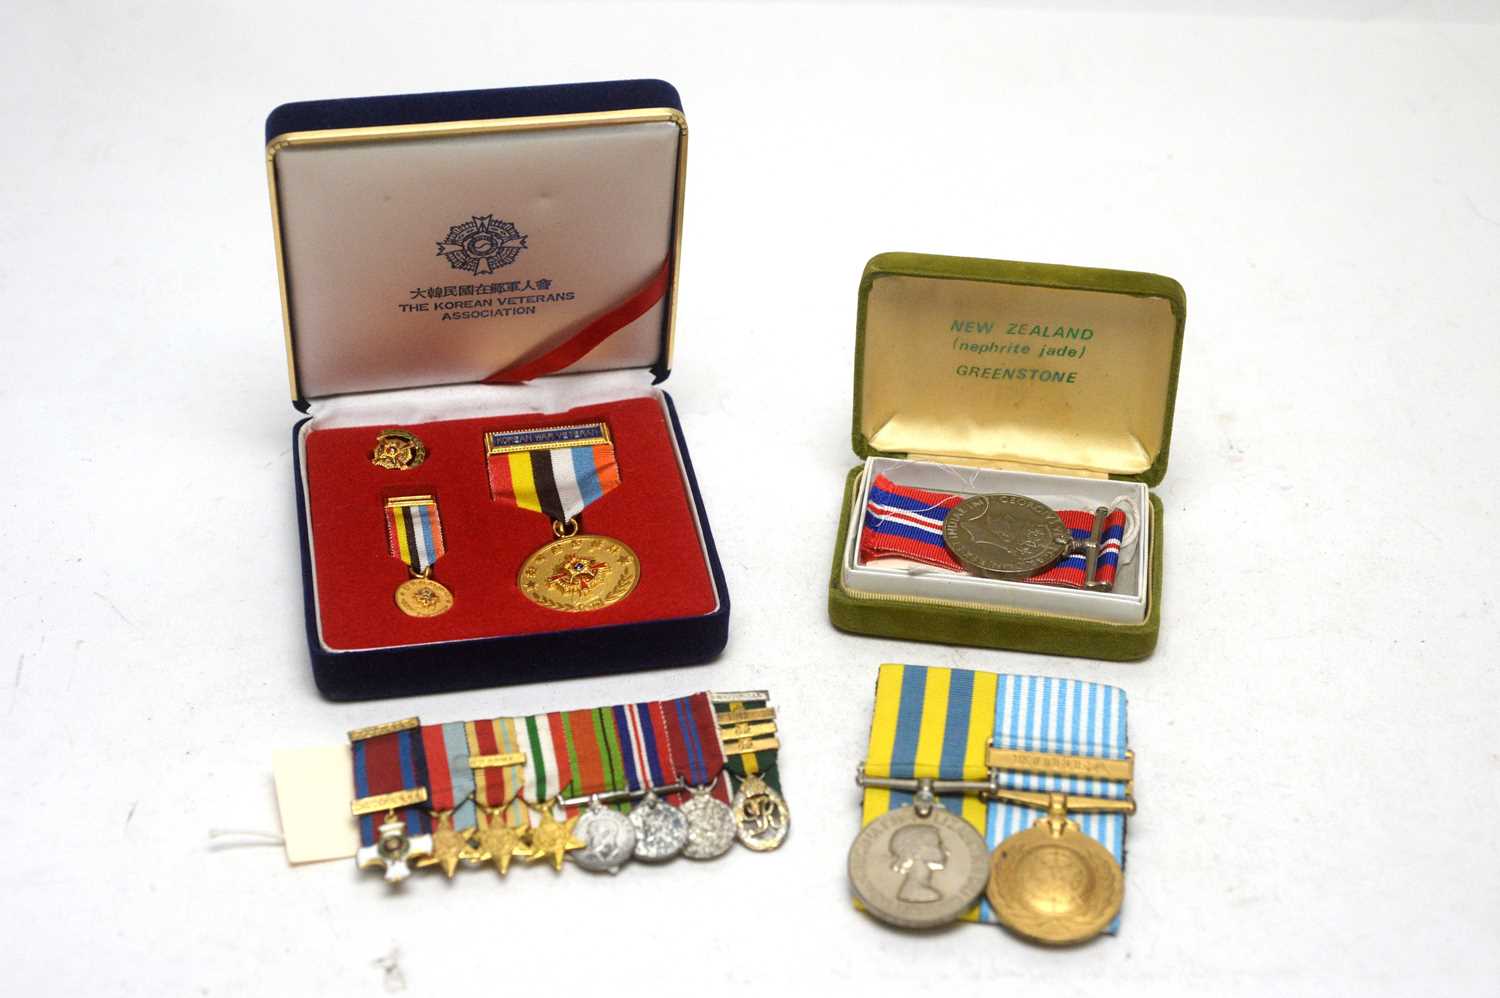 A pair of Korean medals, and other medals